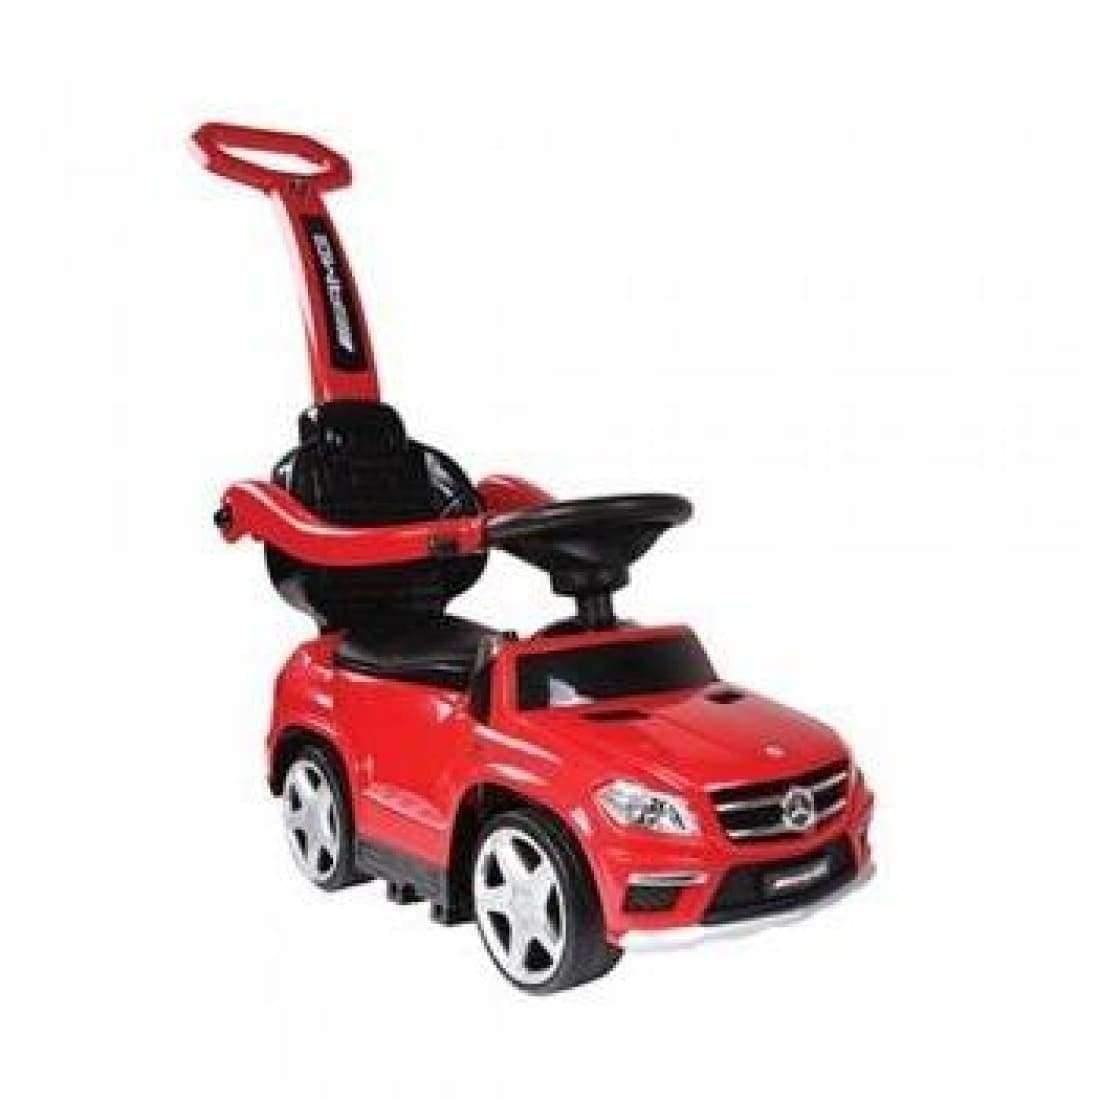 Best Ride On Cars 4 in 1 Push Car Best ride On Cars 4-in-1 Mercedes Stroller Ride-On Toy Push Car Red